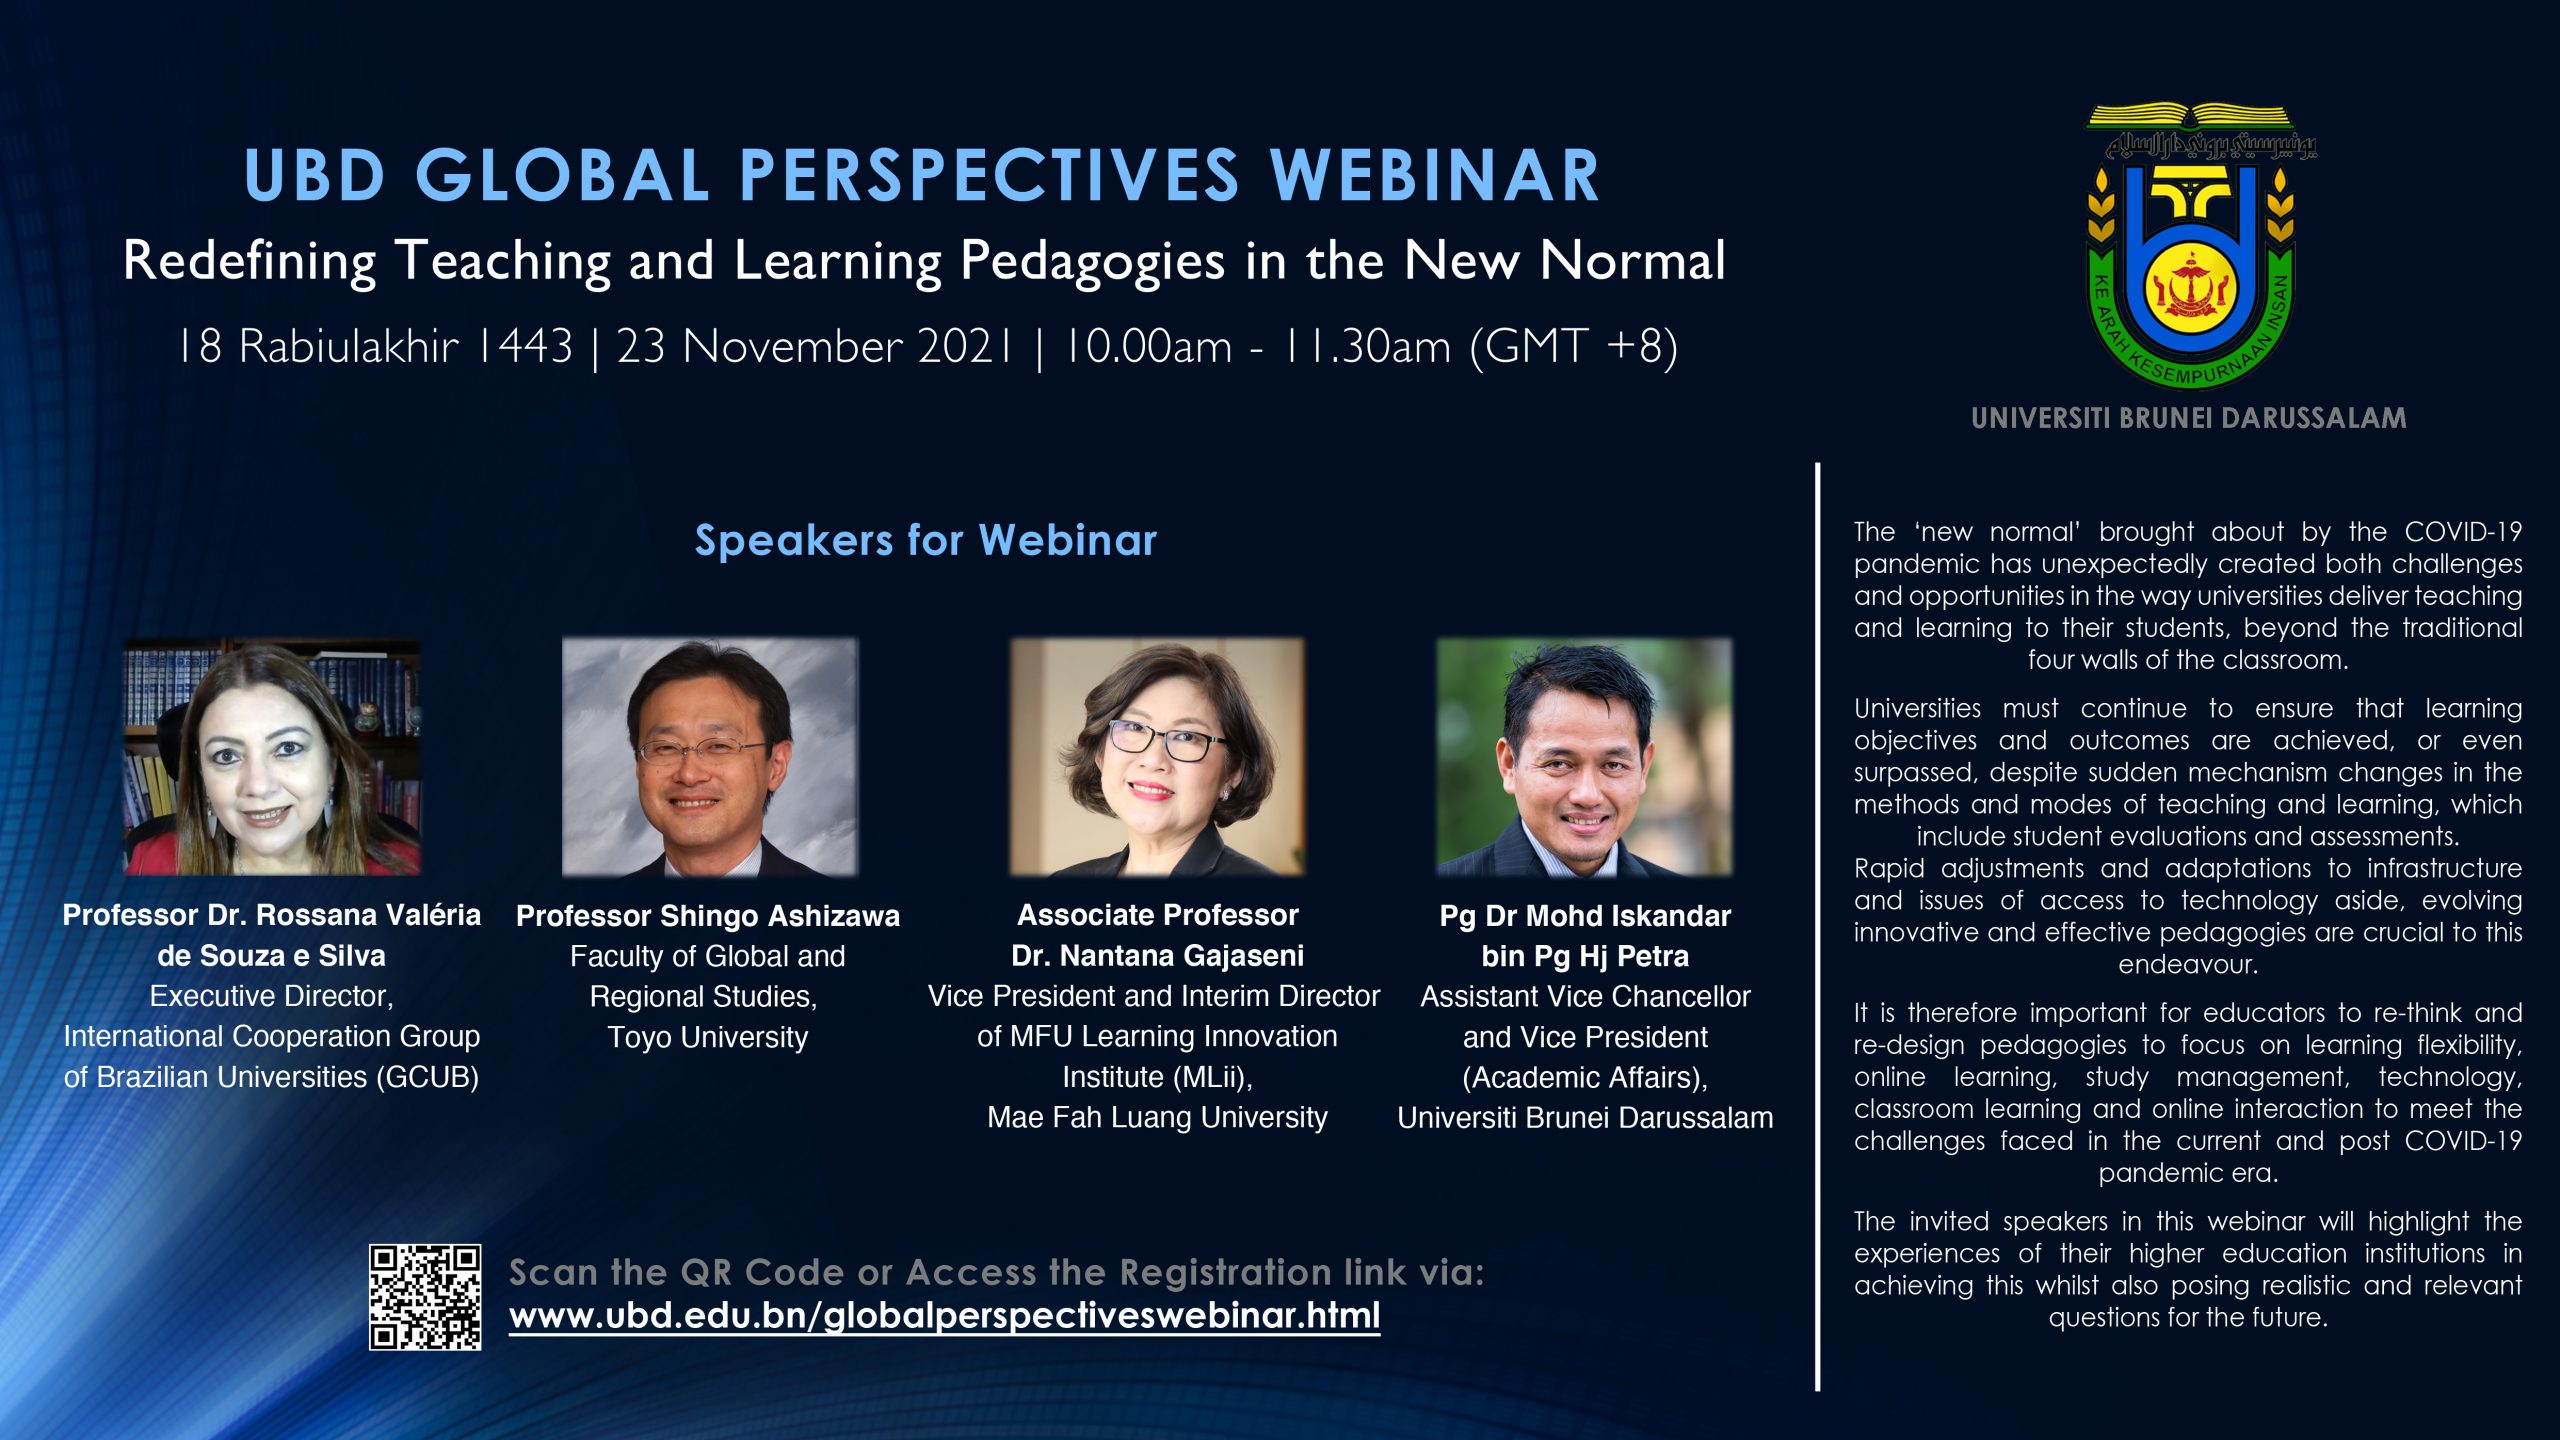 Invitation to UBD Global Perspectives Webinar: Redefining Teaching Learning Pedagogies in the New Normal on 23 Nov 2021, 10am to 11.30am (GMT+8)